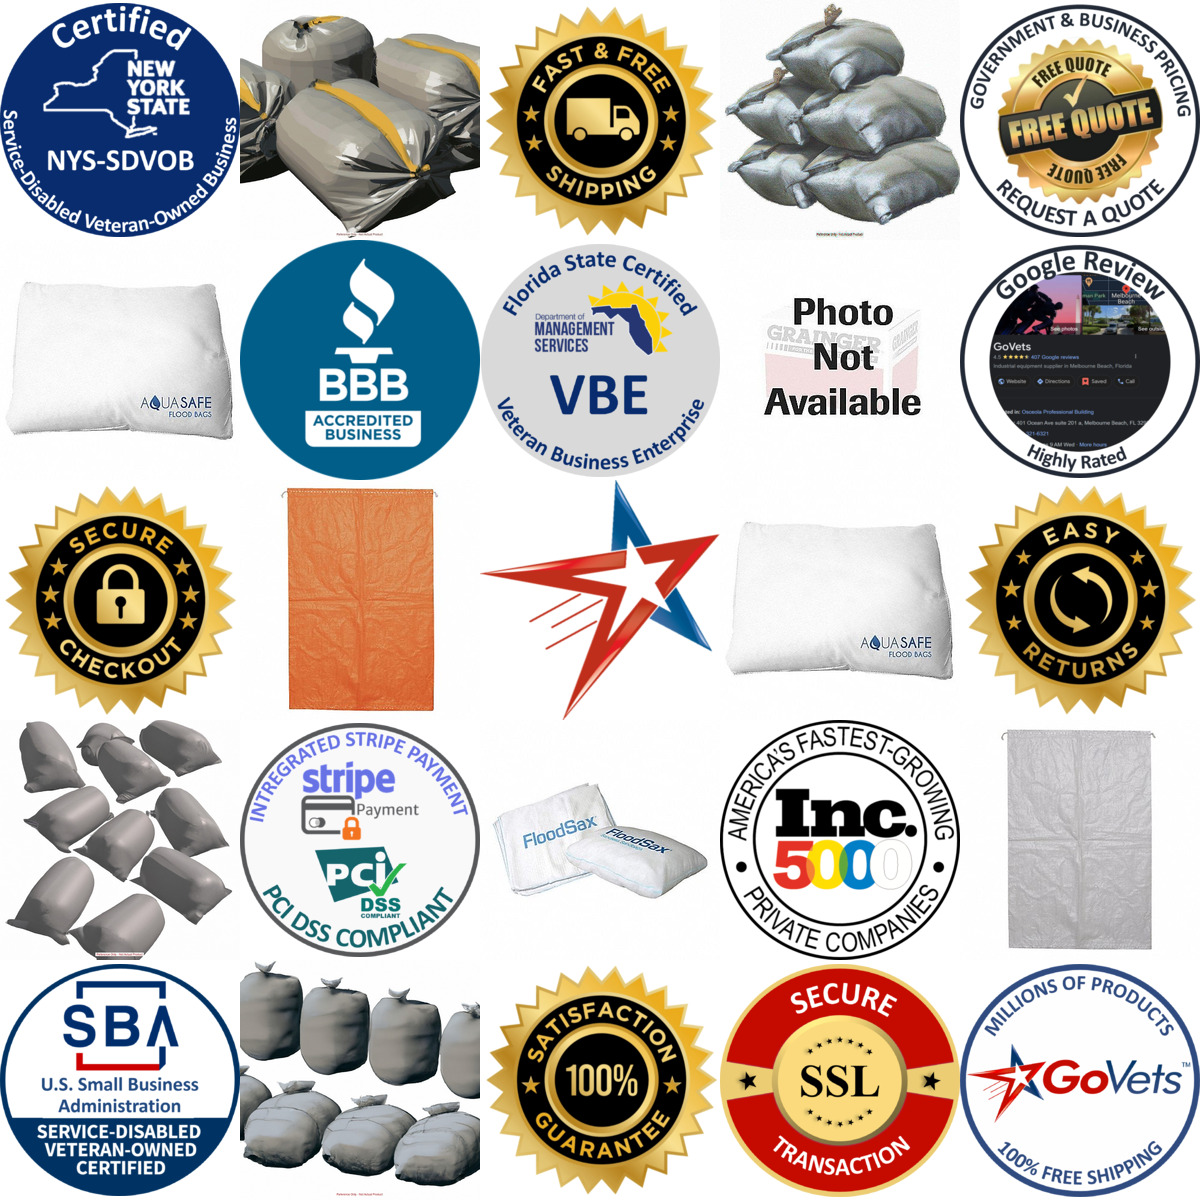 A selection of Sand Bags products on GoVets